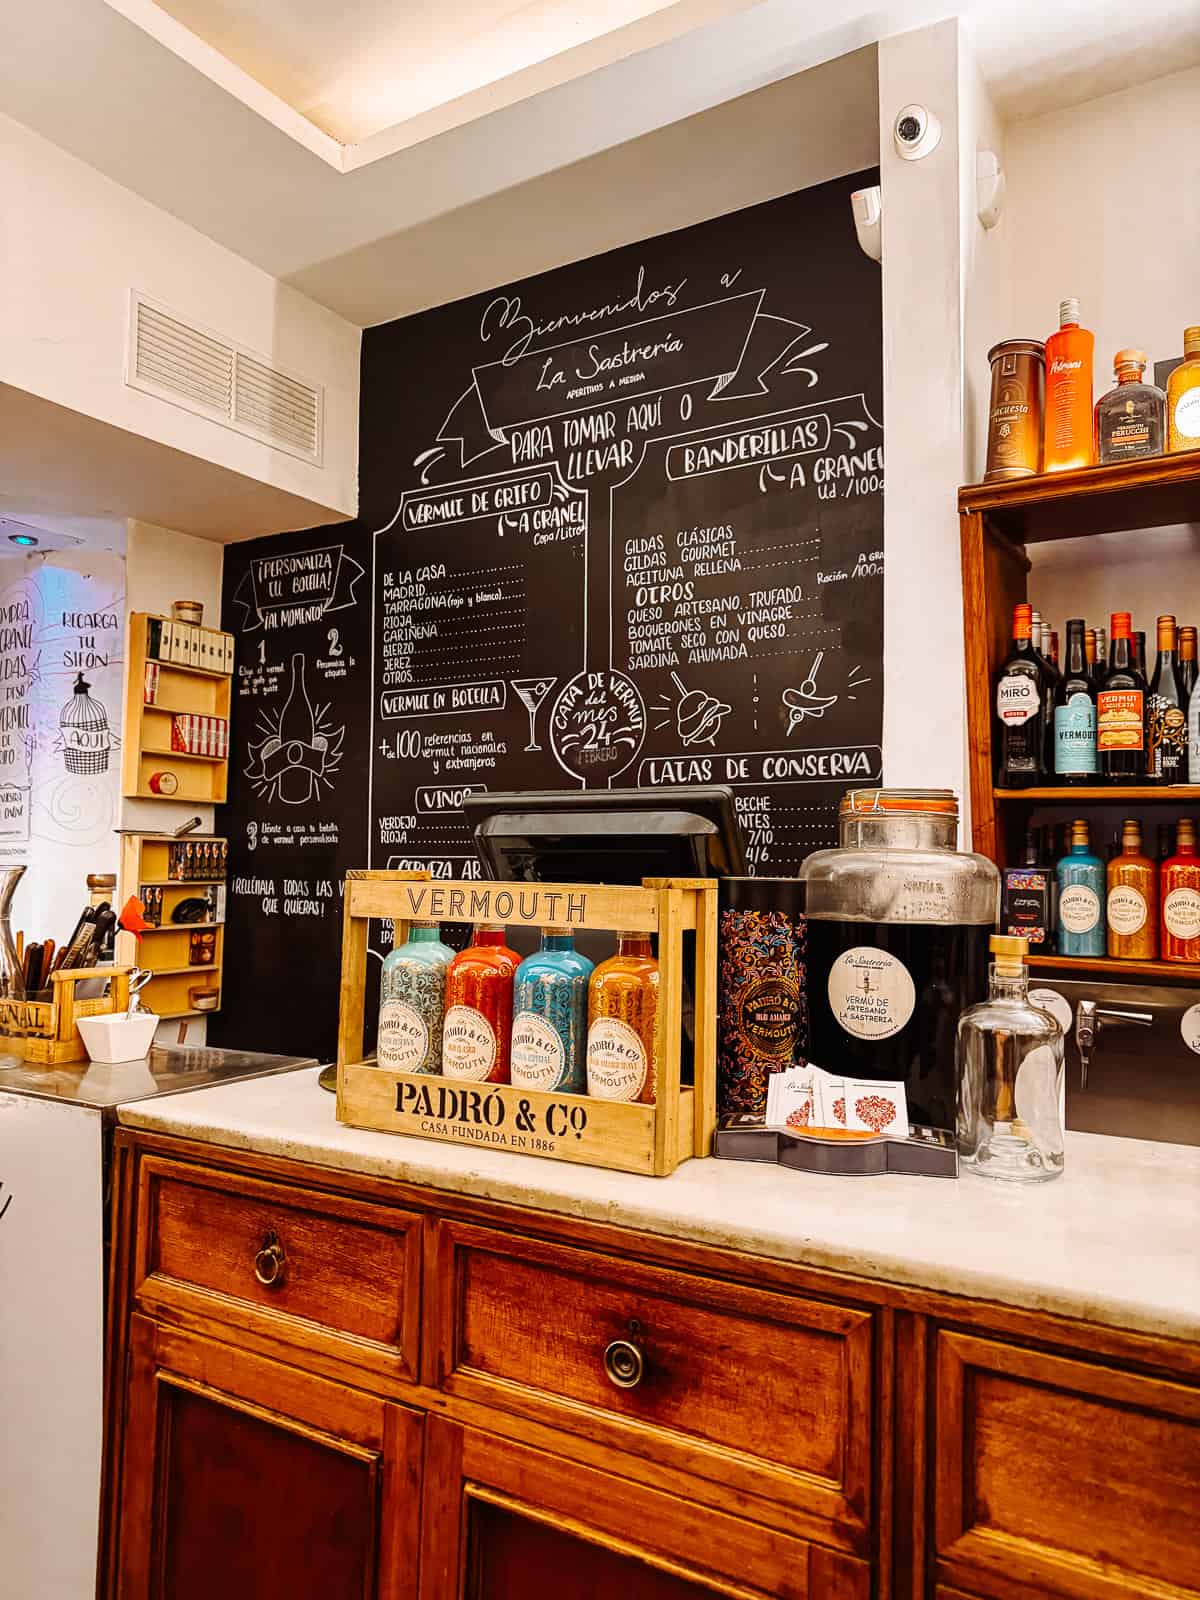 A quaint vermouth bar with a chalkboard menu detailing an array of tapas and drinks, alongside a vintage wooden counter displaying bottles of vermouth, inviting a local Spanish dining experience.